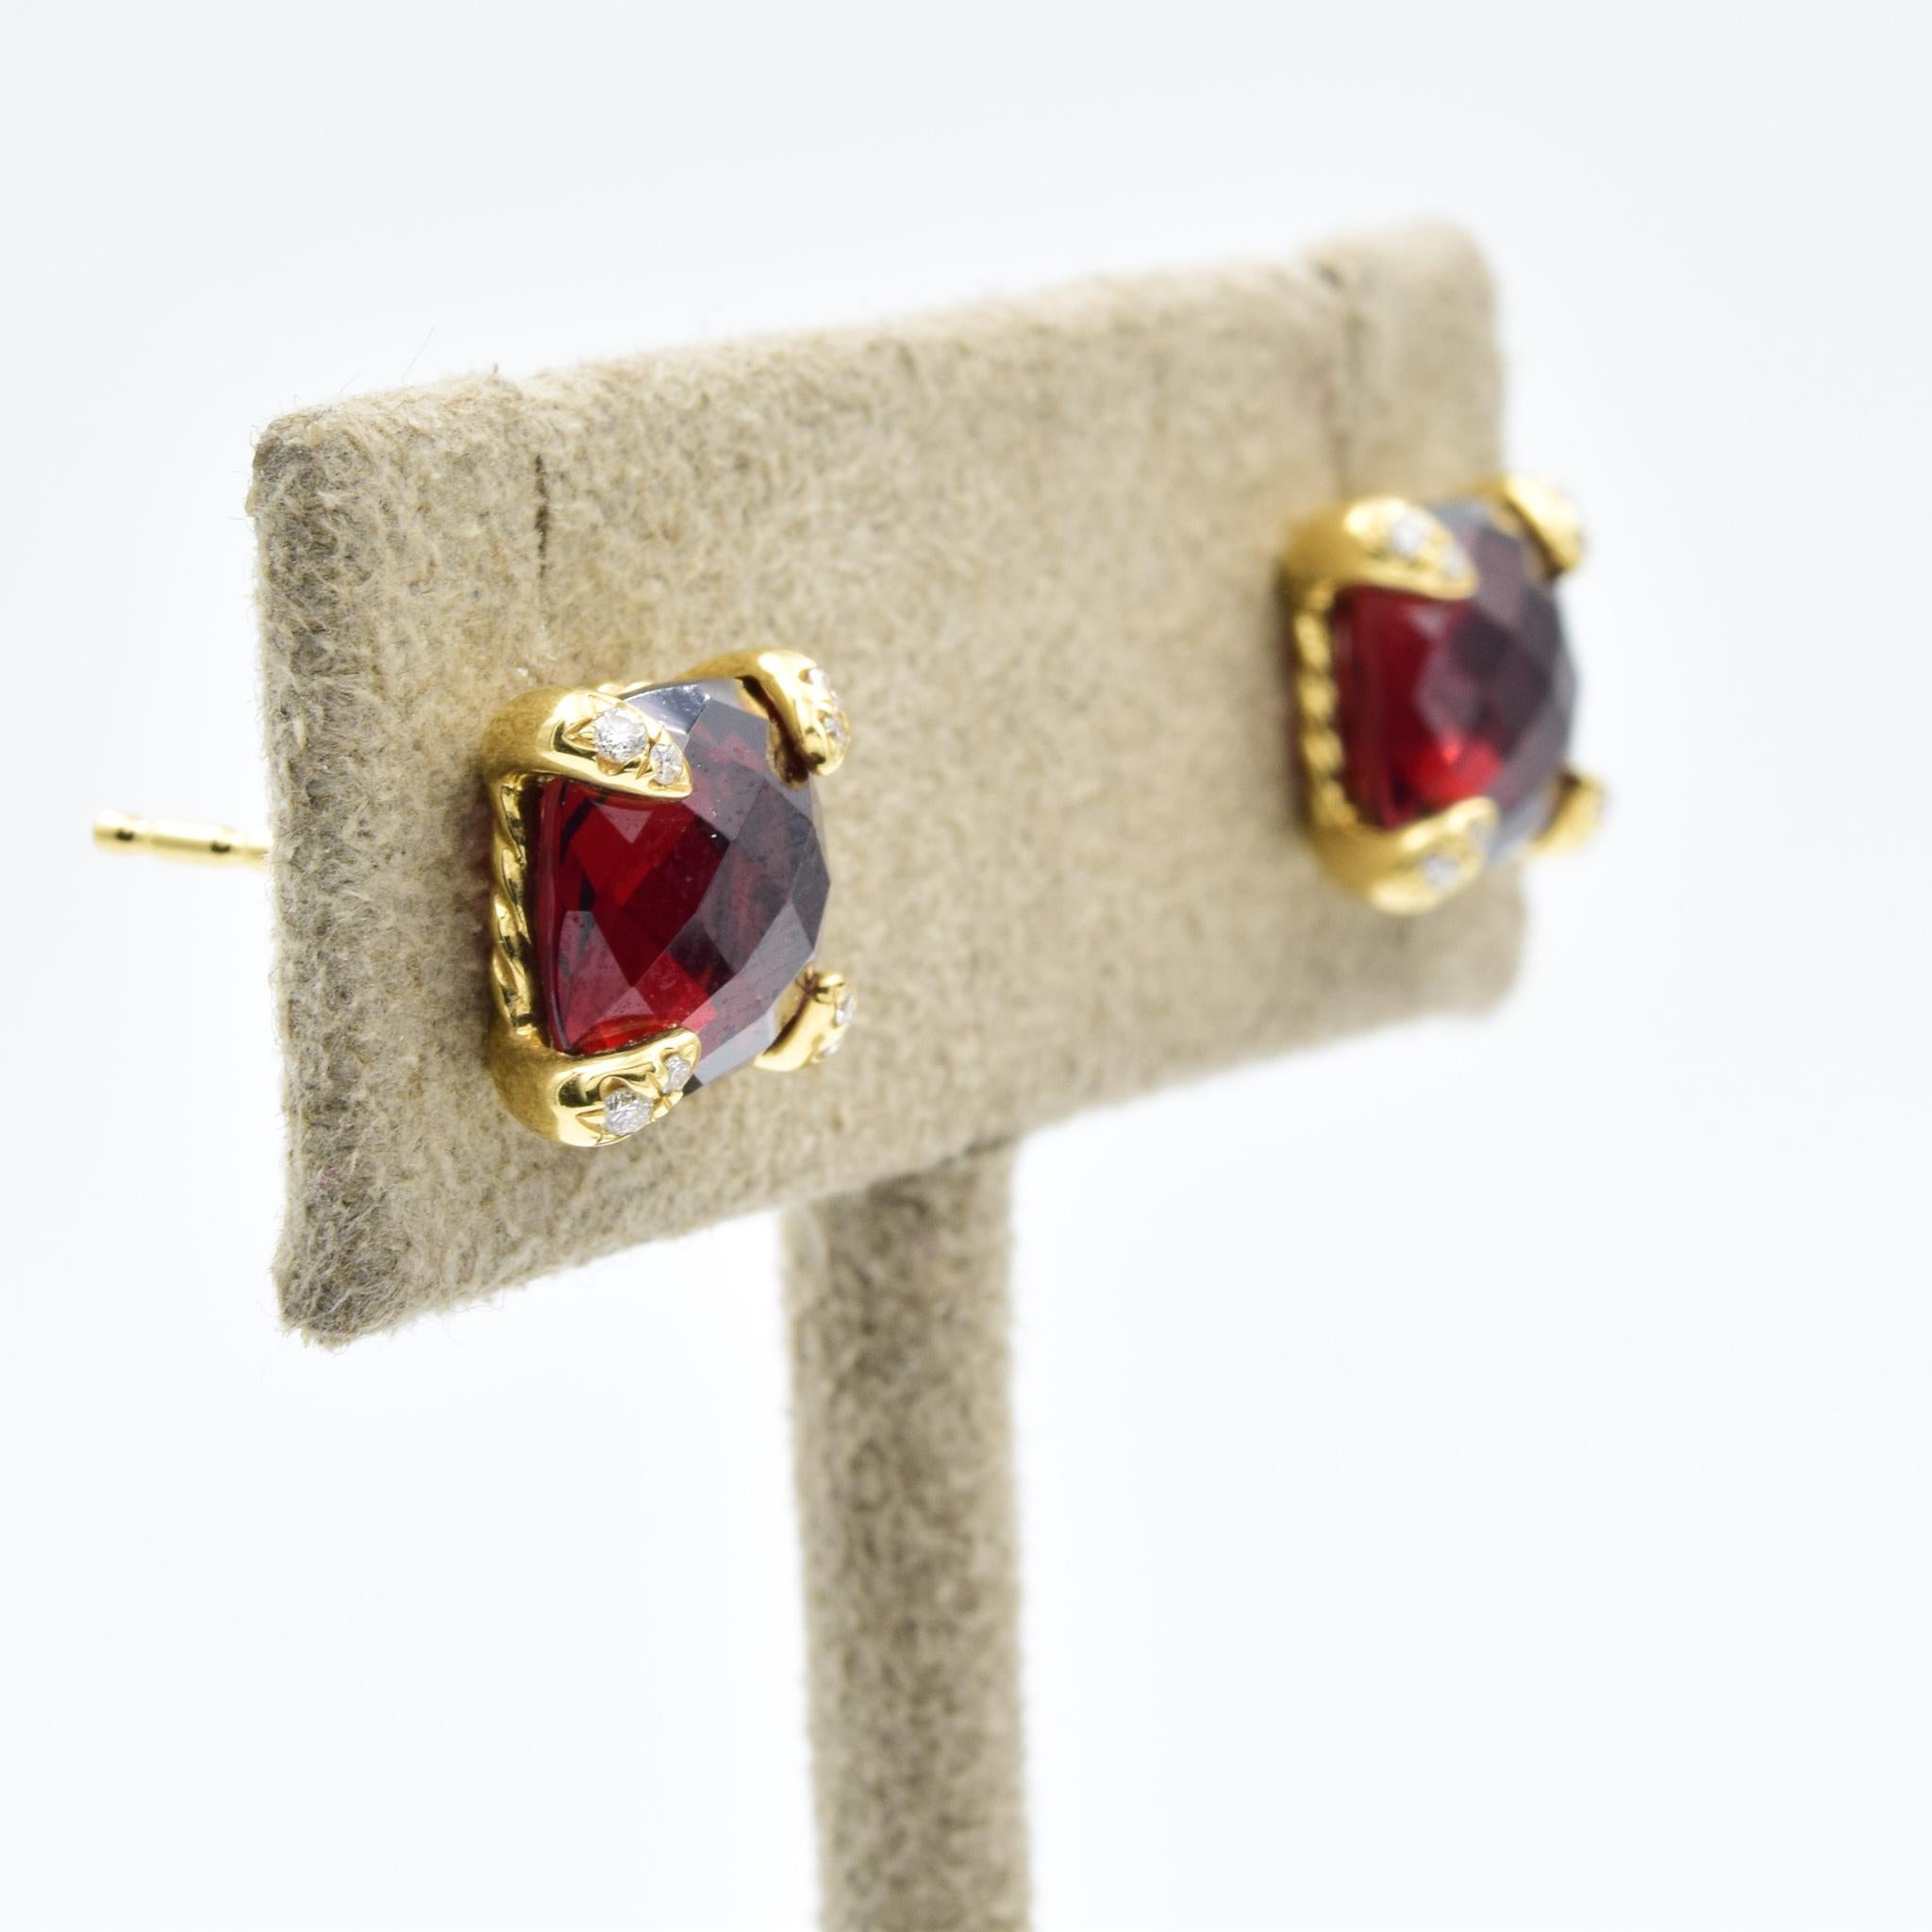 These Rhodolite Garnet Pave Diamond earrings were recently traded in and are in excellent condition.  These earrings are known as the Chatelaine collection Studs in 18k Yellow Gold.  The earrings are 6mm in width and have a friction back.  Please